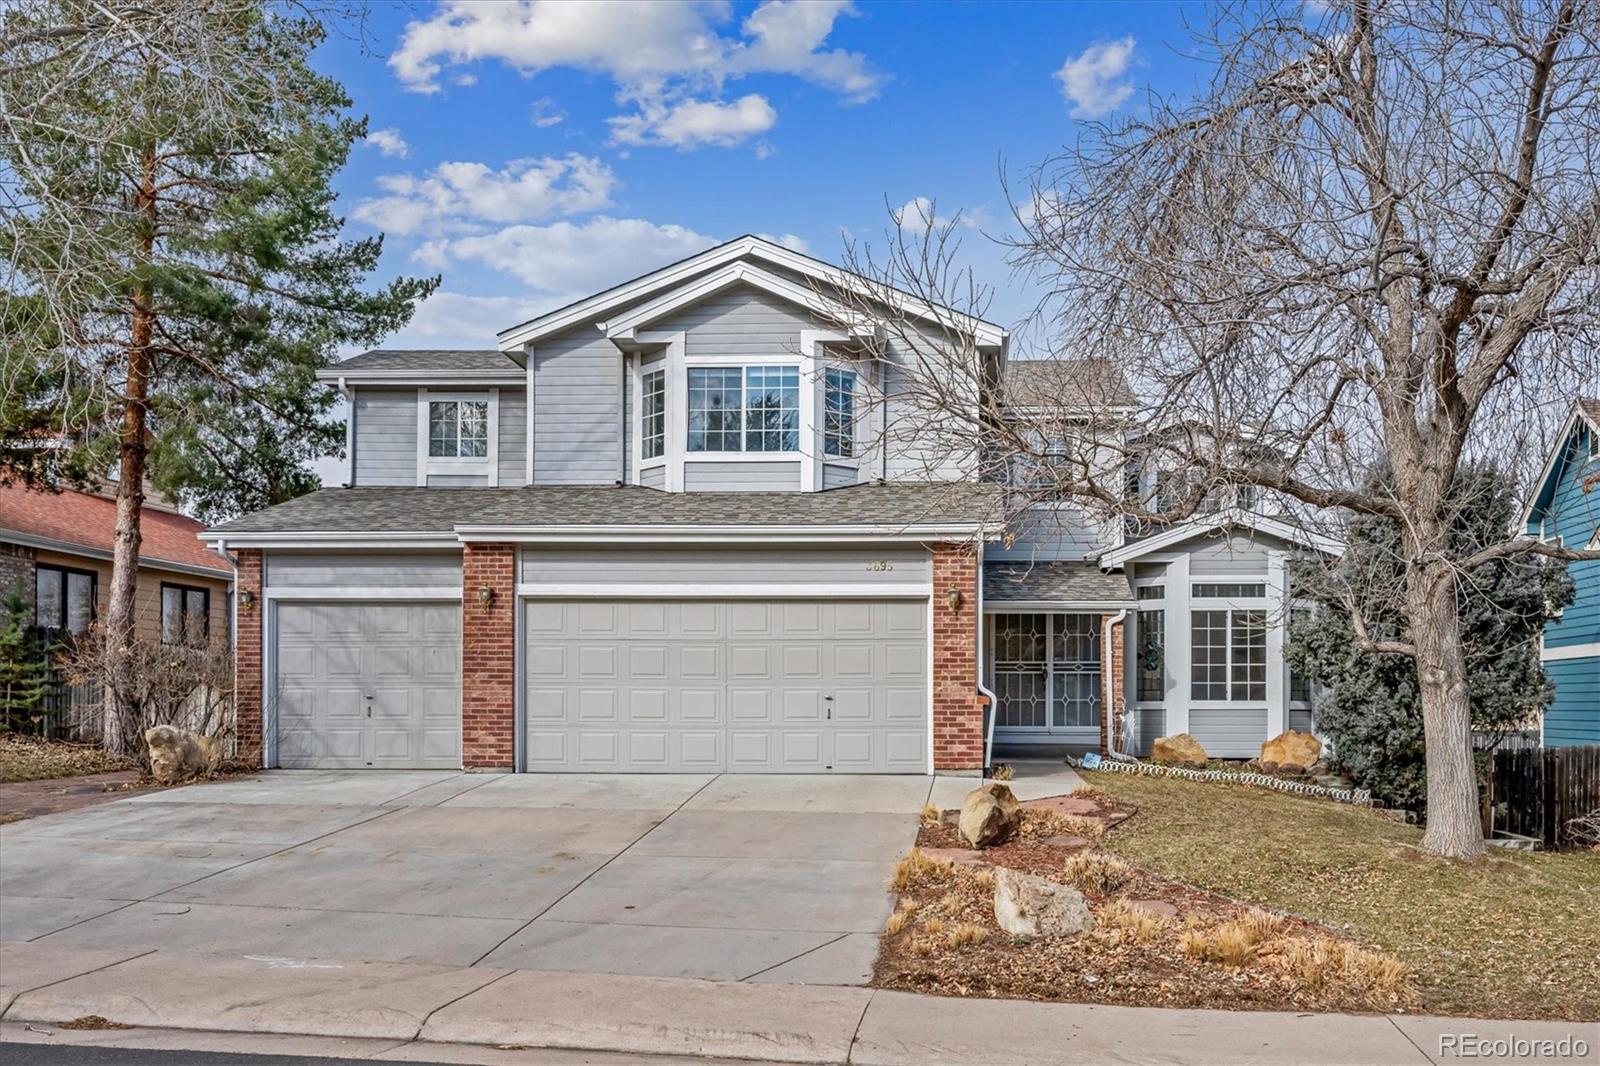 3695 s truckee way, Aurora sold home. Closed on 2024-04-16 for $605,000.